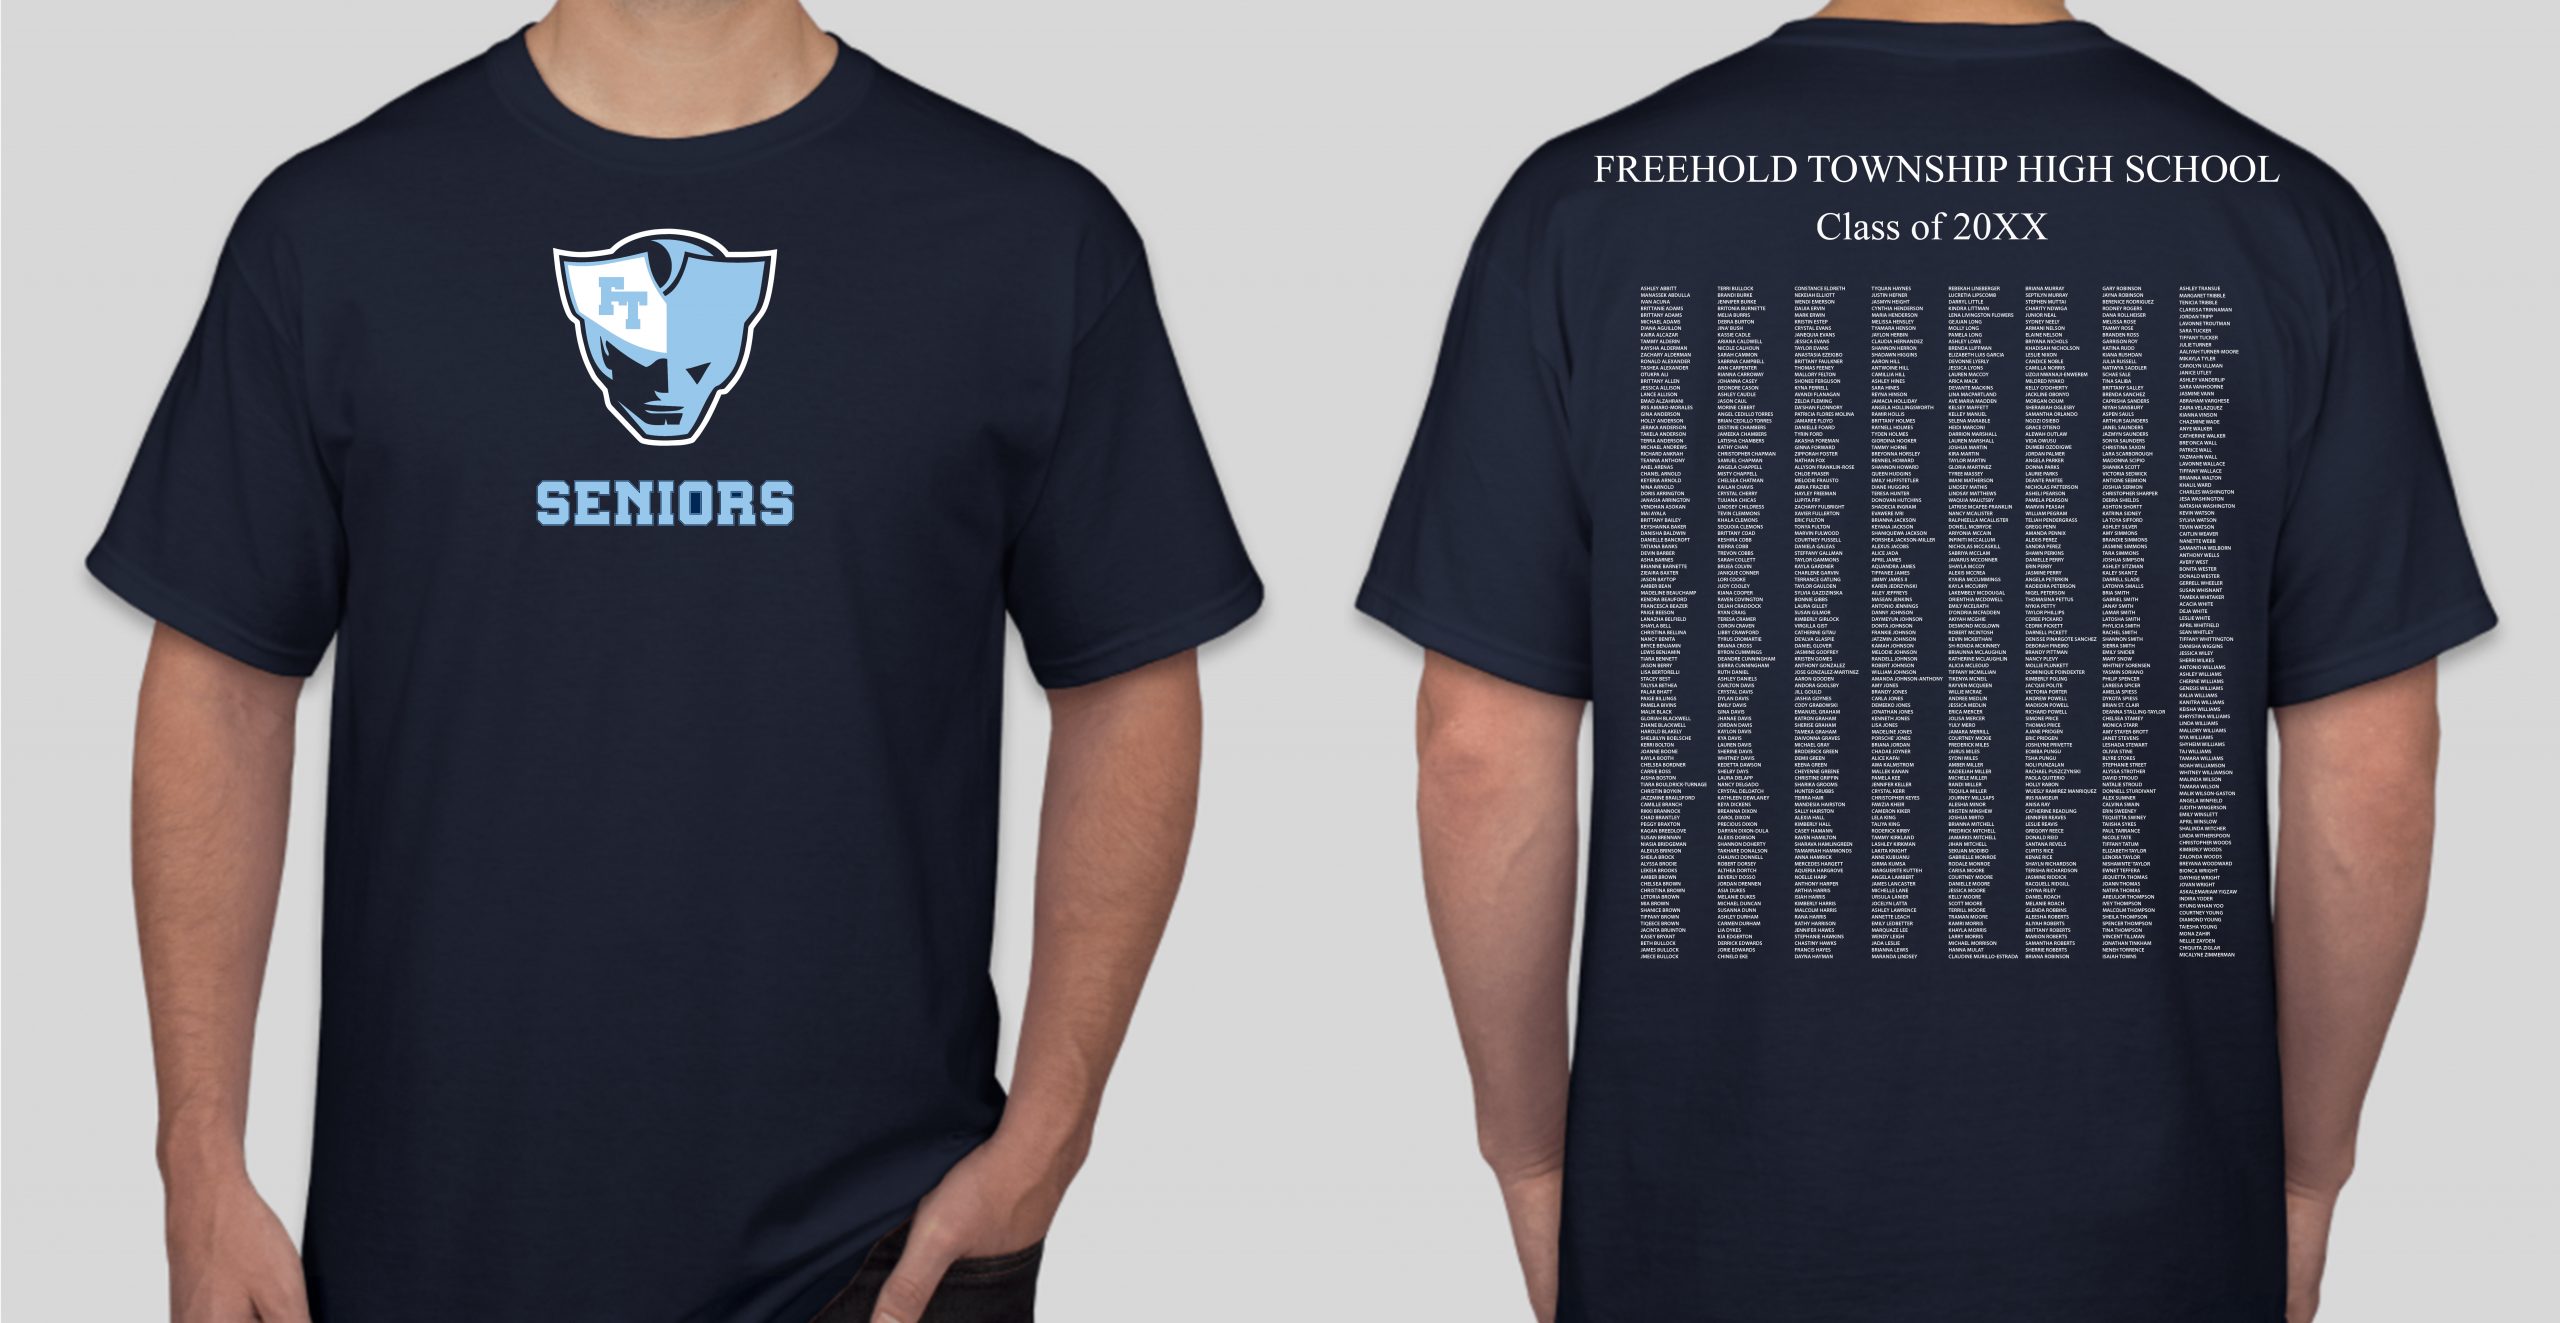 freehold township high school wrestling conference